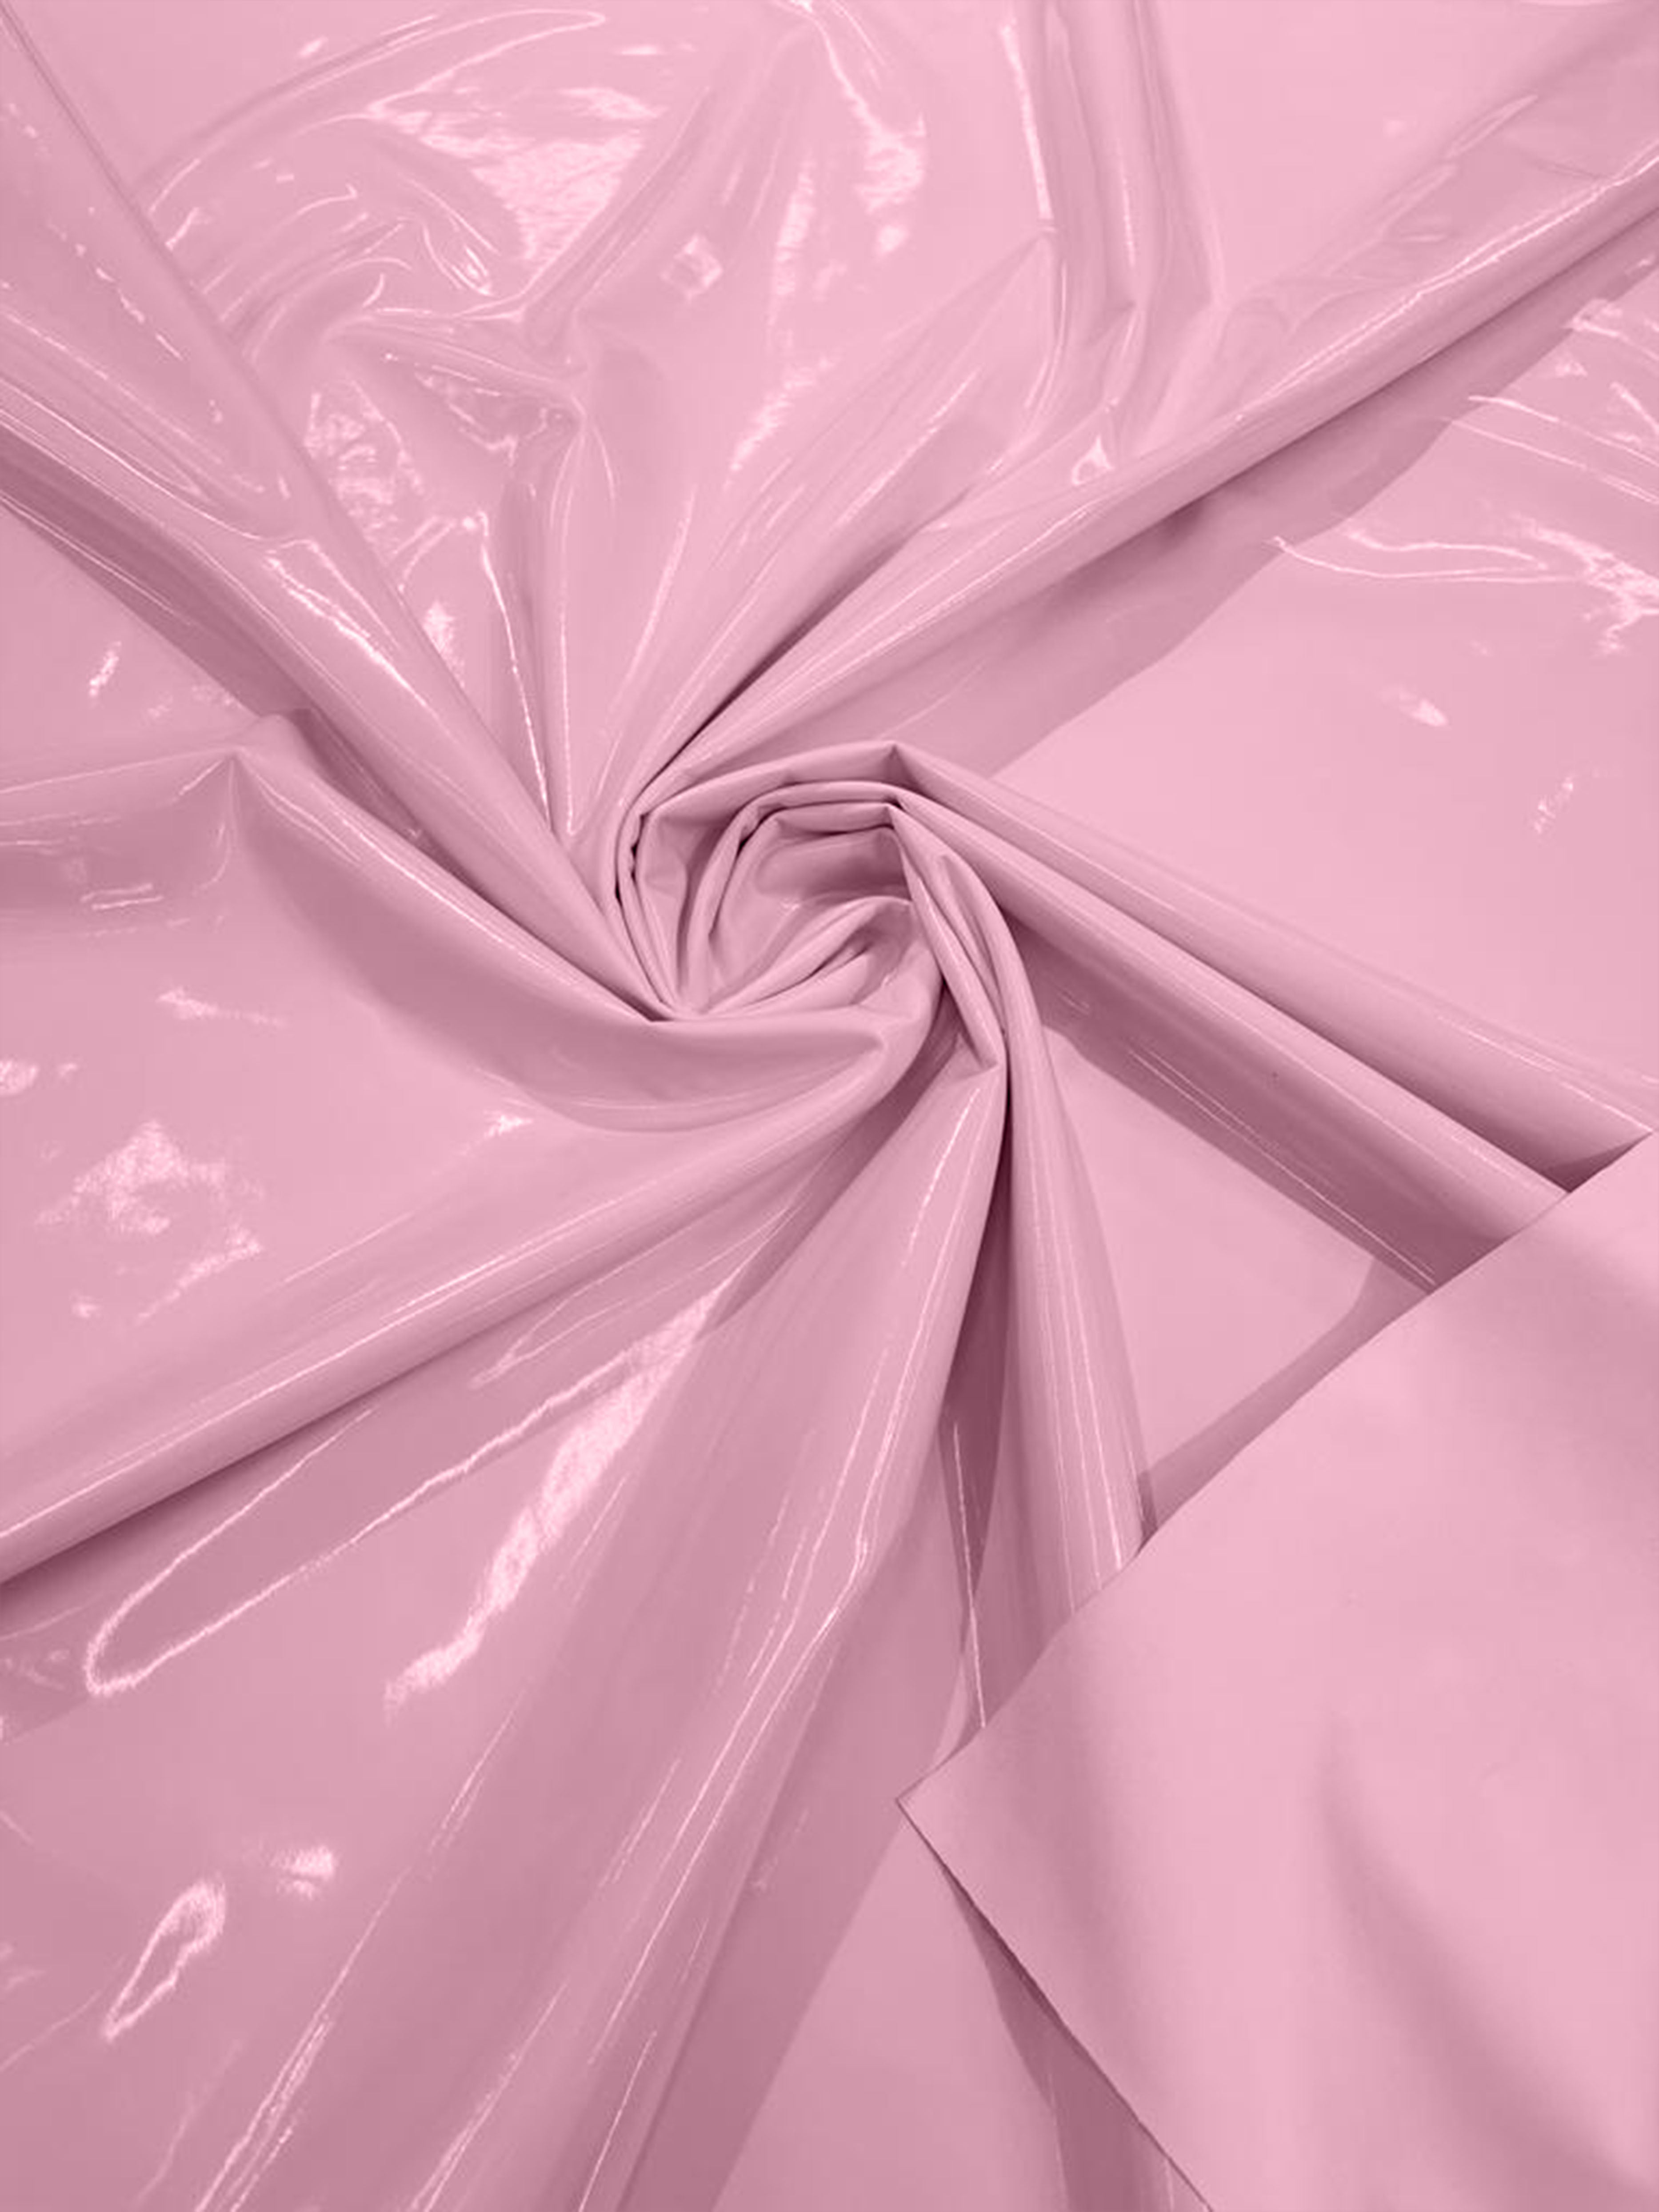 Pink Spandex Shiny Vinyl Fabric (Latex Stretch) - Sold By The Yard